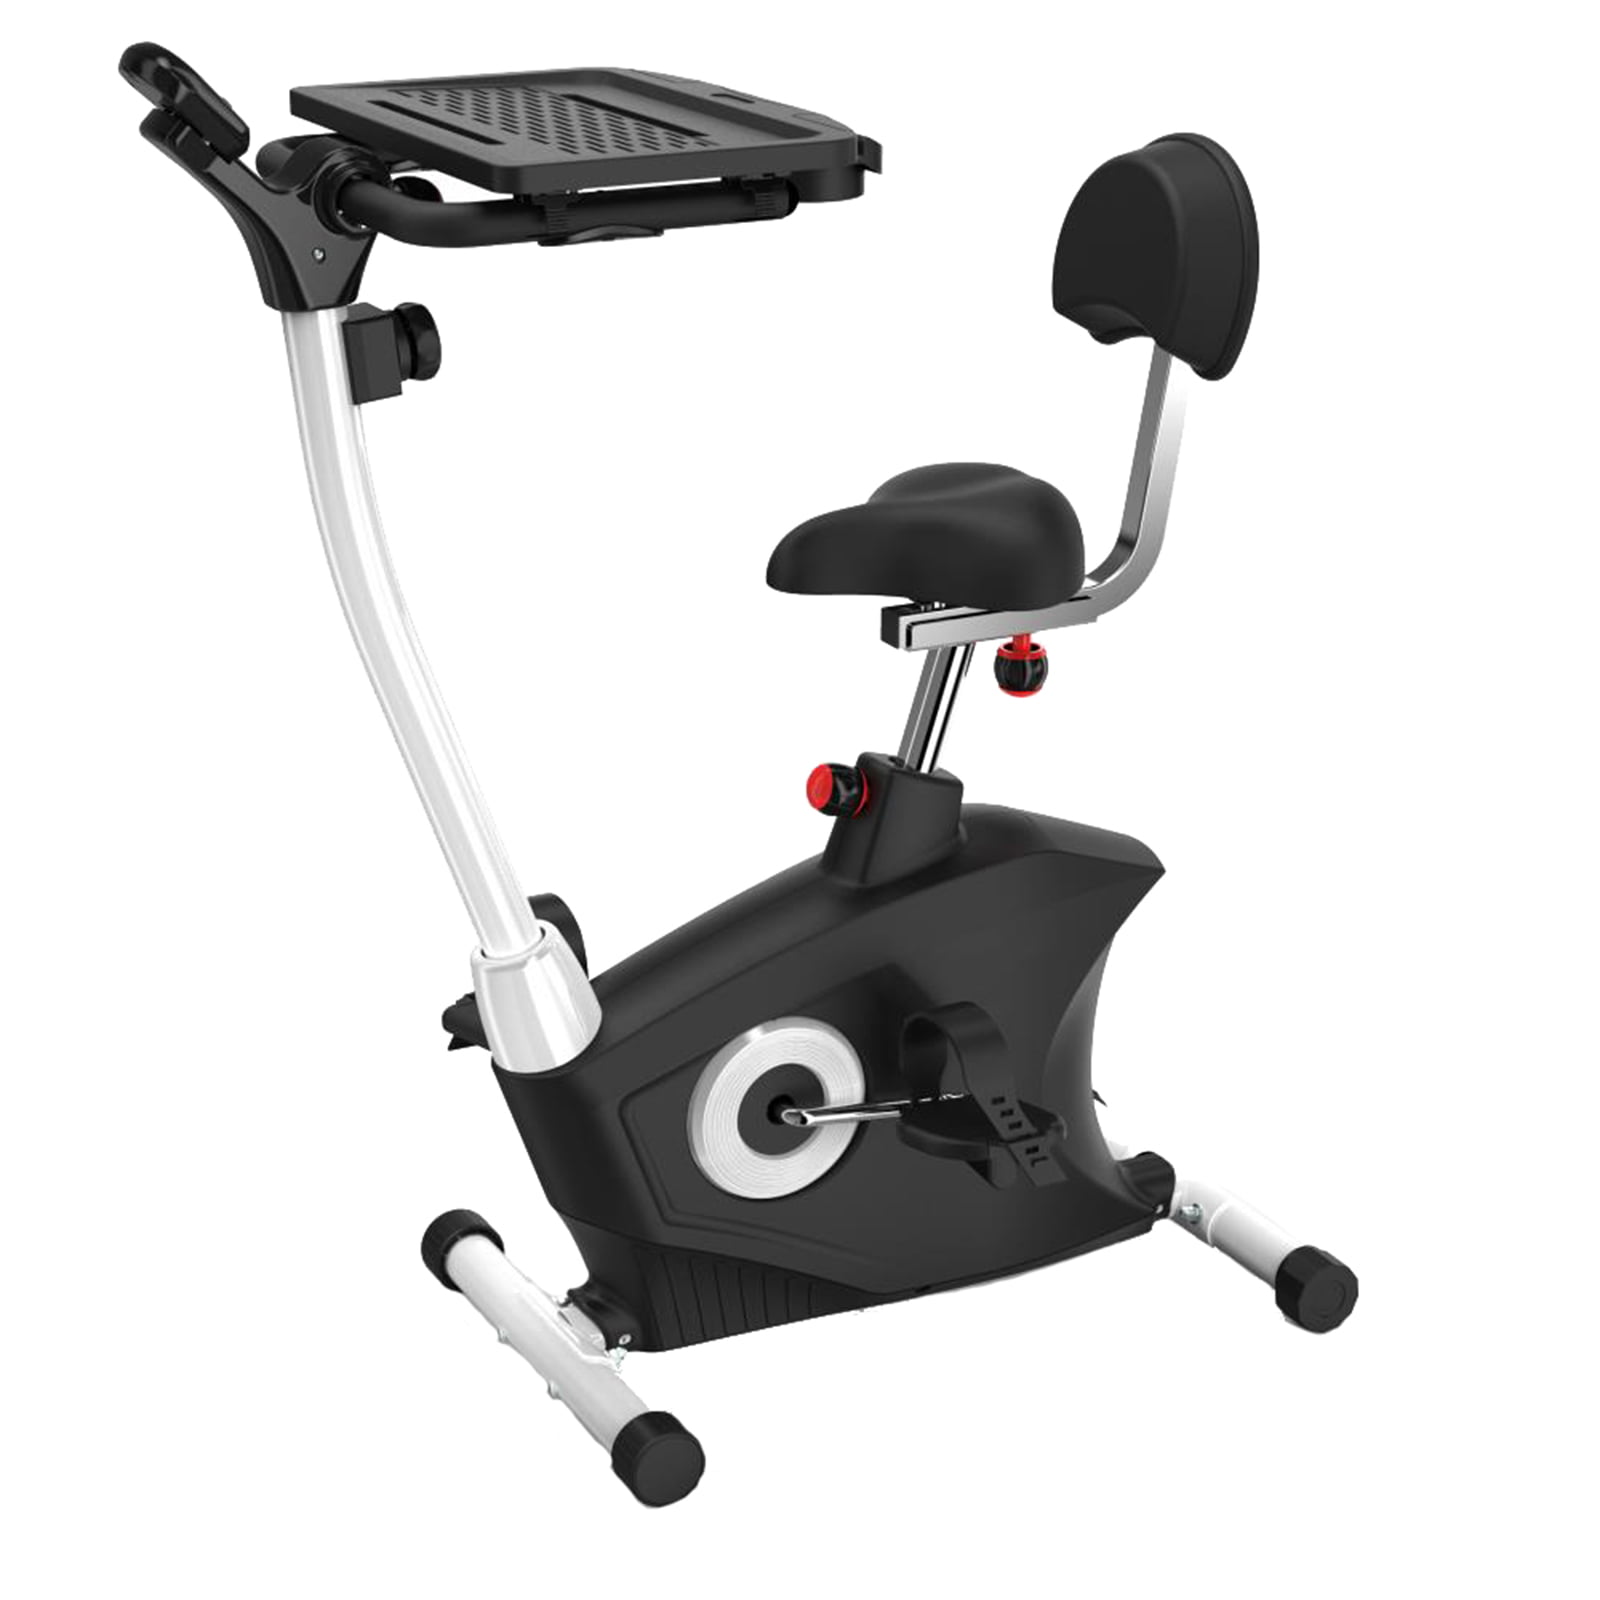 SereneLifeUpright Stationary Exercise Bike Cardio Cycle Pedal Trainer 